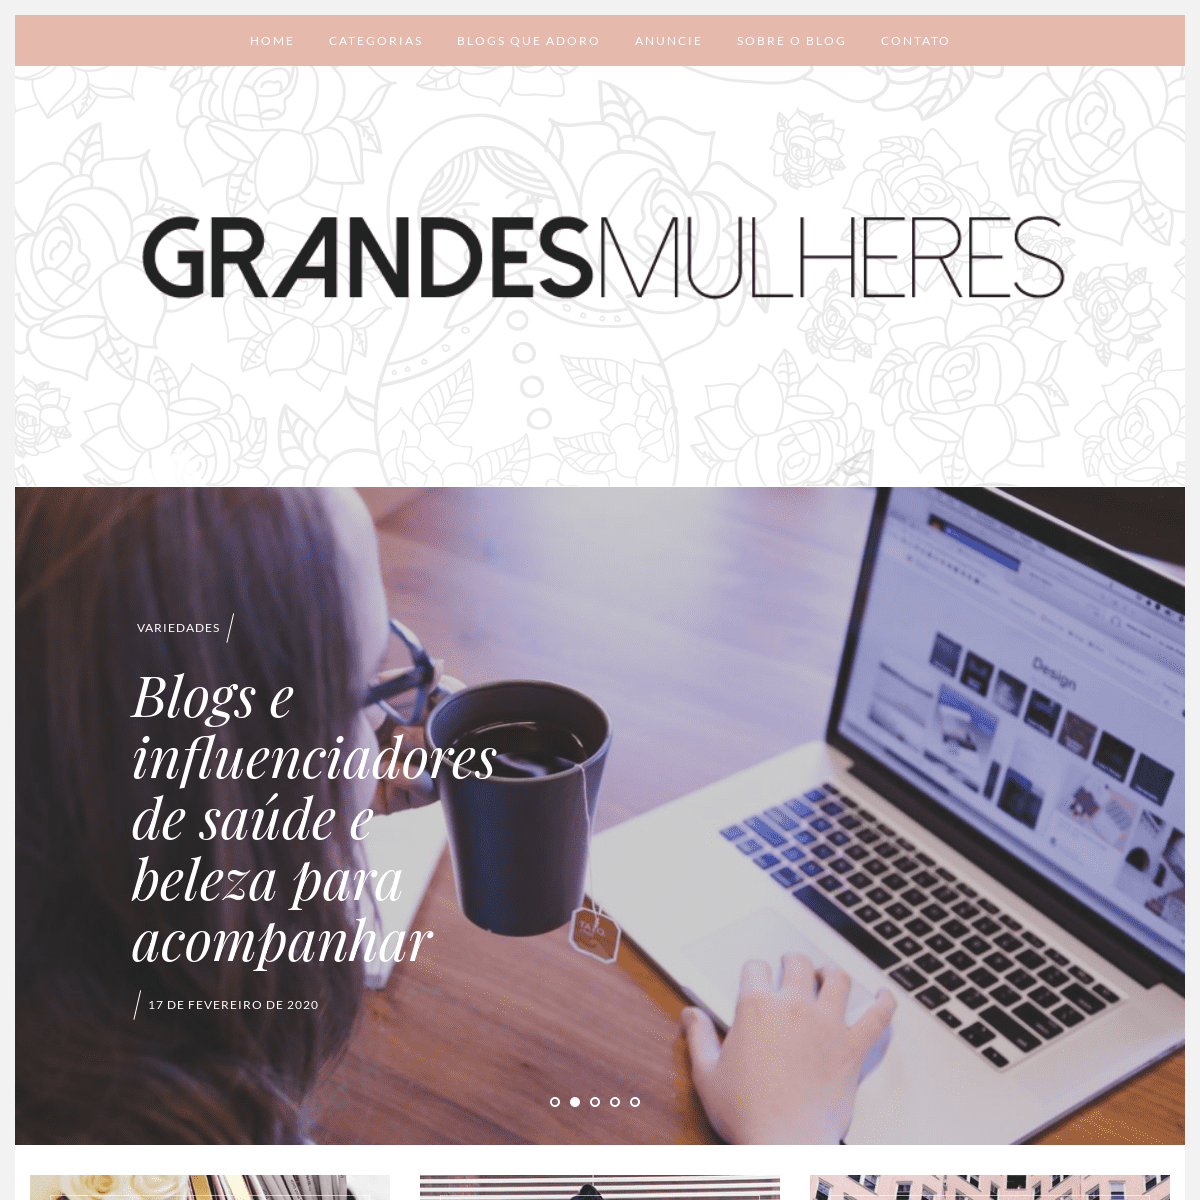 A complete backup of grandesmulheres.com.br